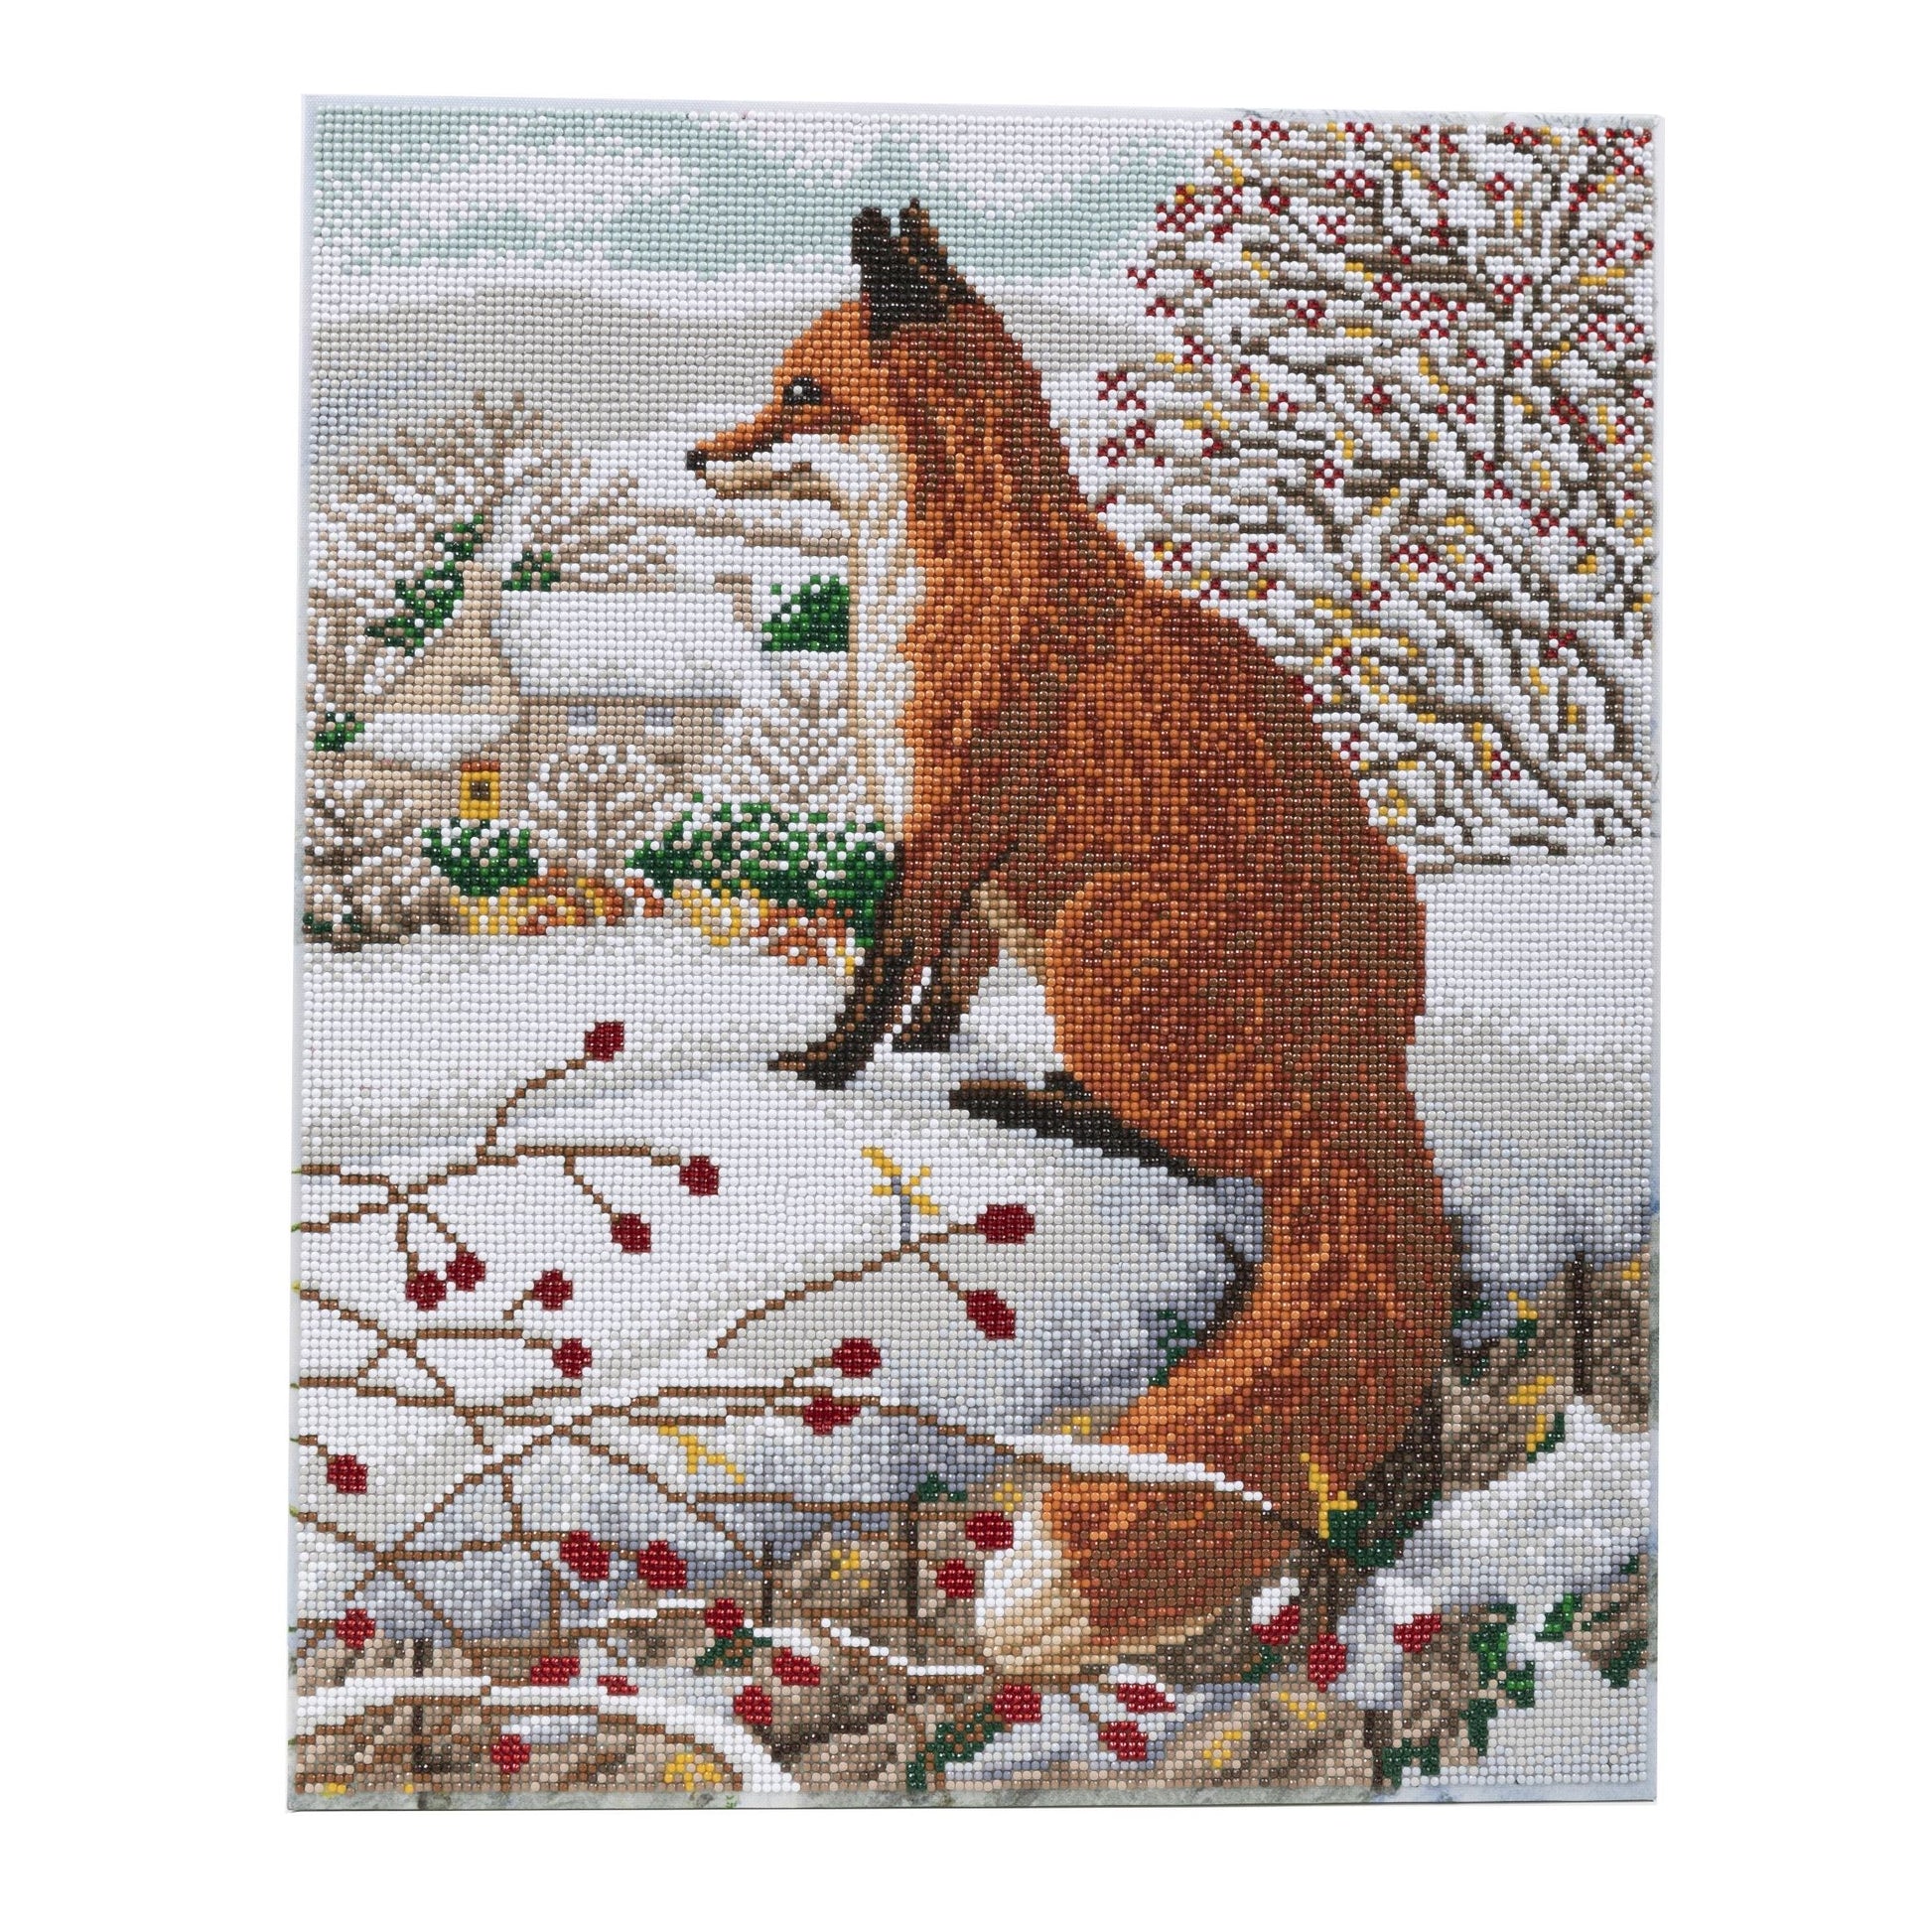 Craft Buddy Crystal Art / Diamond Painting 40cm x 50cm Picture Kit on Wood  Frame - Howling Wolf Club - Full Crystal 